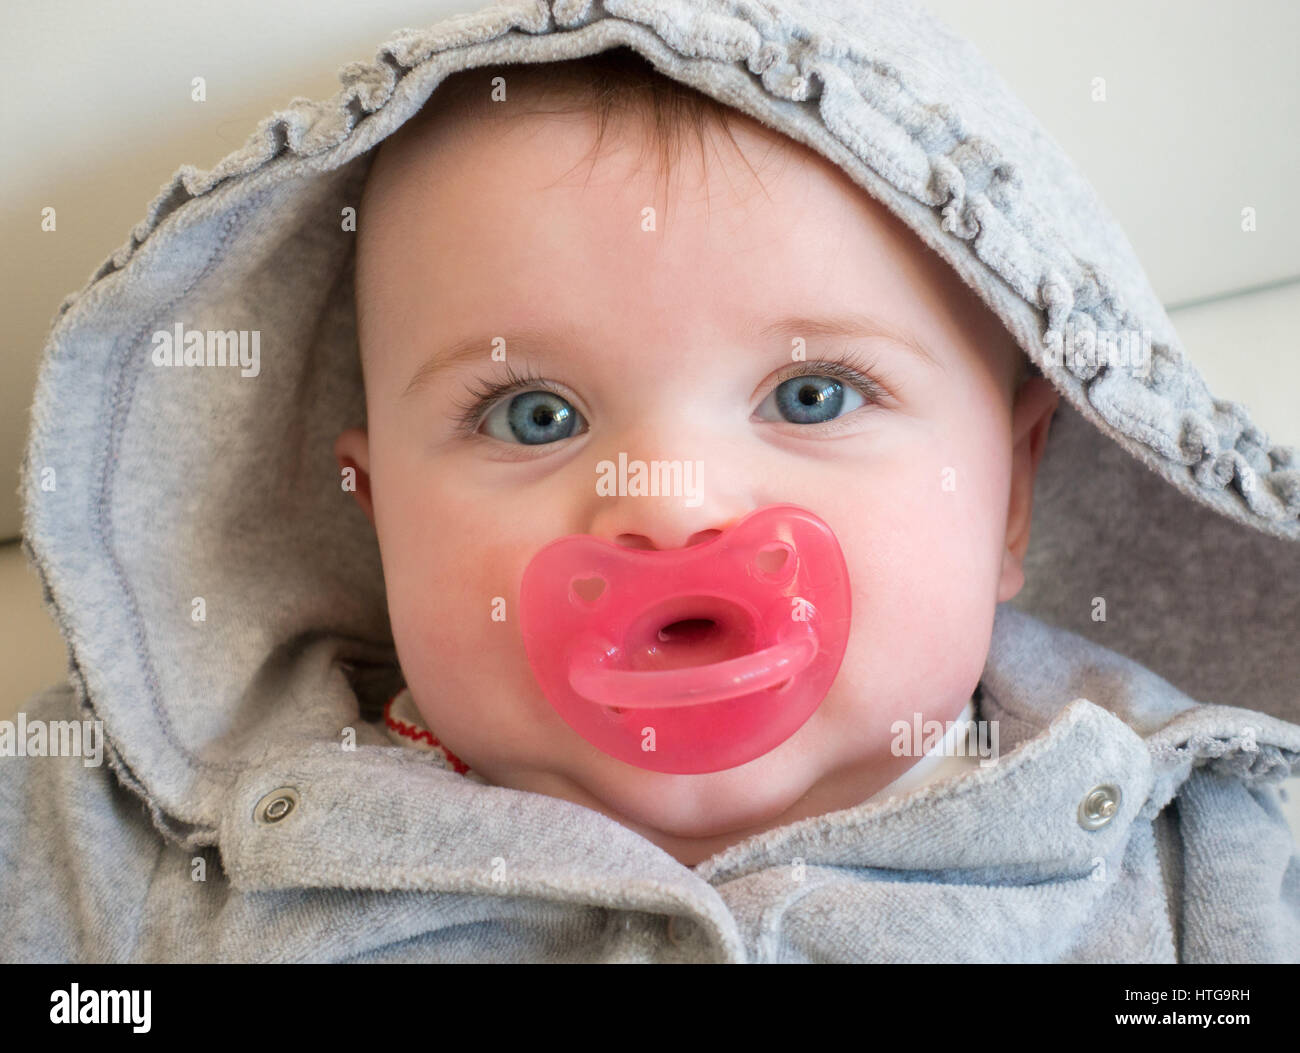 Portrait of baby girl with blue eyes. Stock Photo